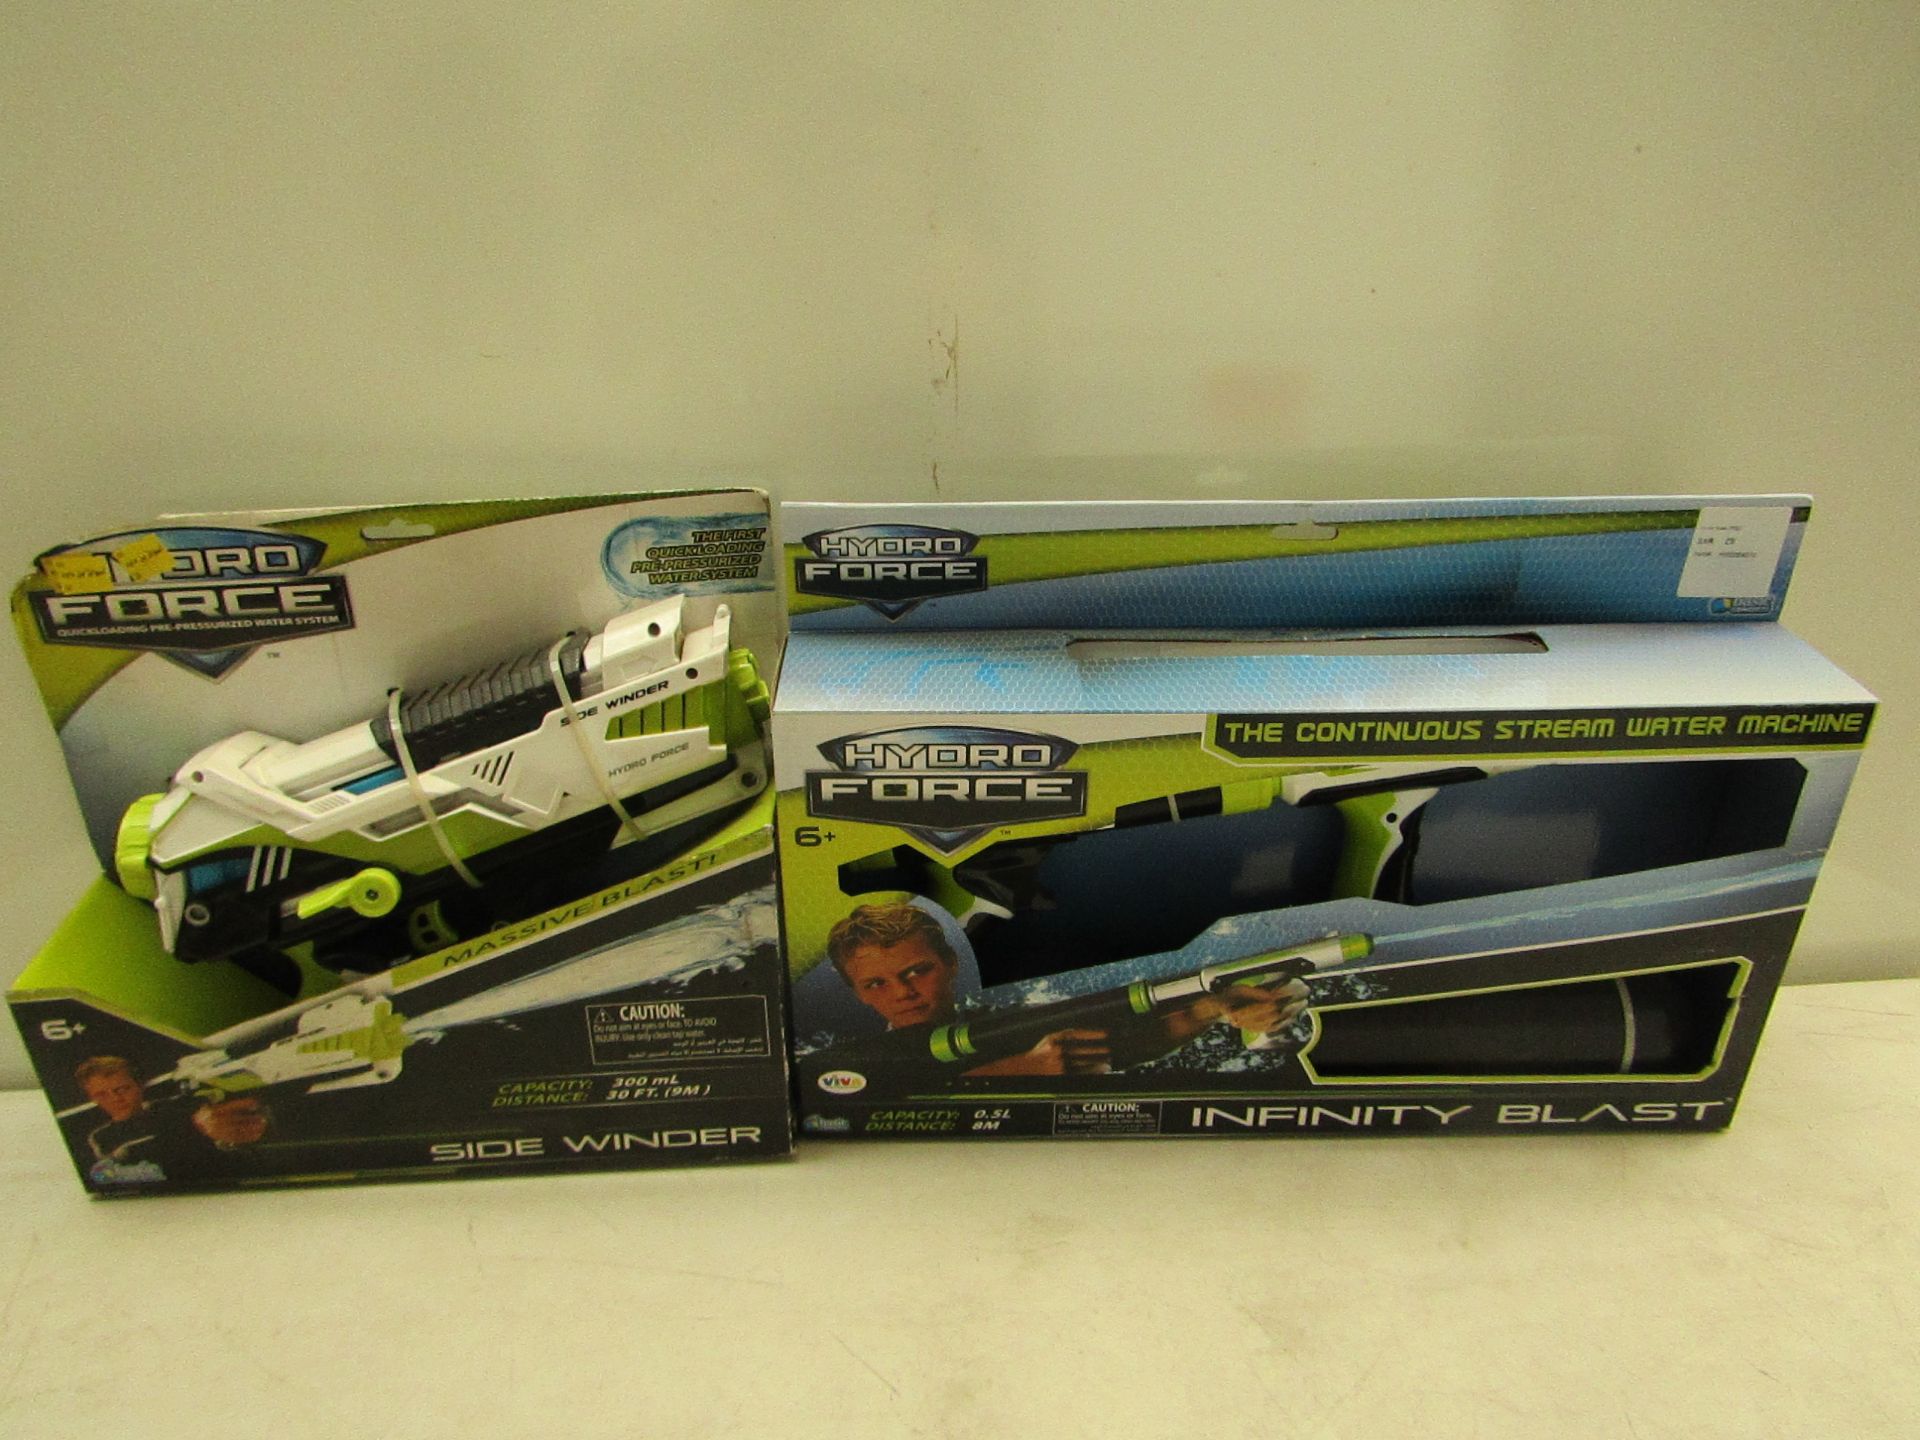 2 items being; Hydro Force infinity blast 0.5L capacity 8m distance, Hydro Force Side Winder,